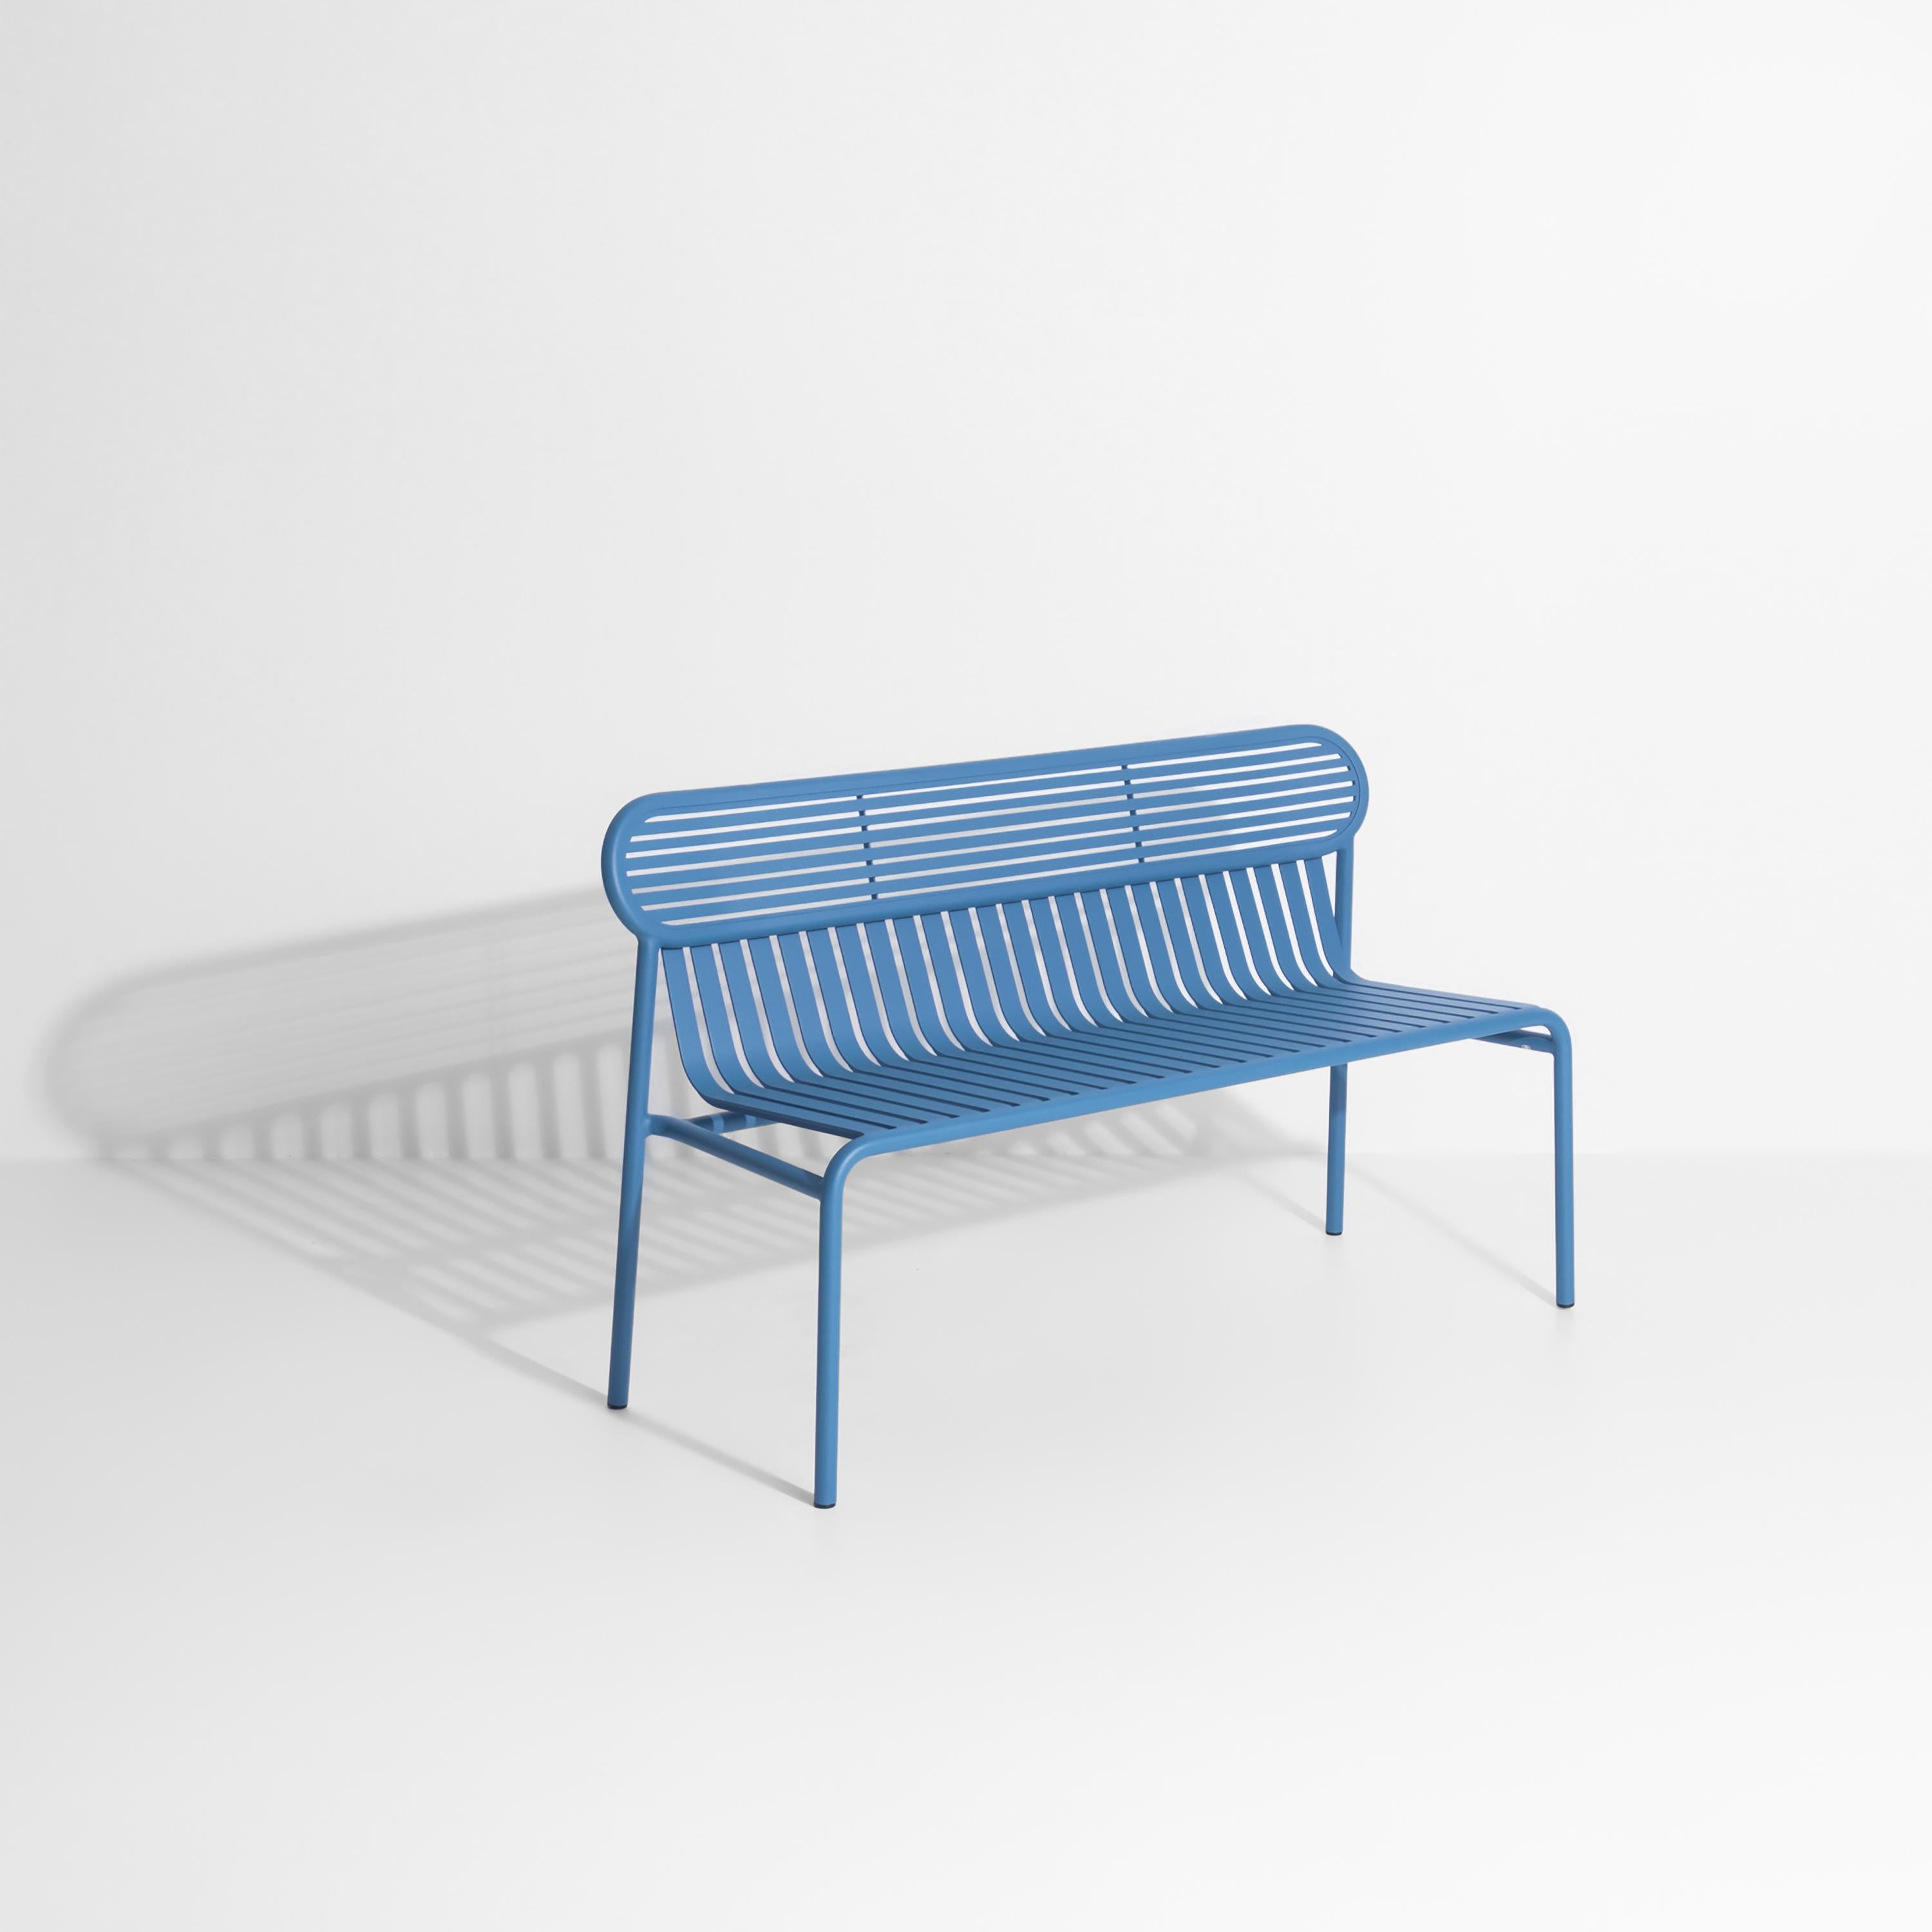 Petite Friture Week-End Bench in Azur Blue Aluminium by Studio BrichetZiegler, 2017

The week-end collection is a full range of outdoor furniture, in aluminium grained epoxy paint, matt finish, that includes 18 functions and 8 colours for the